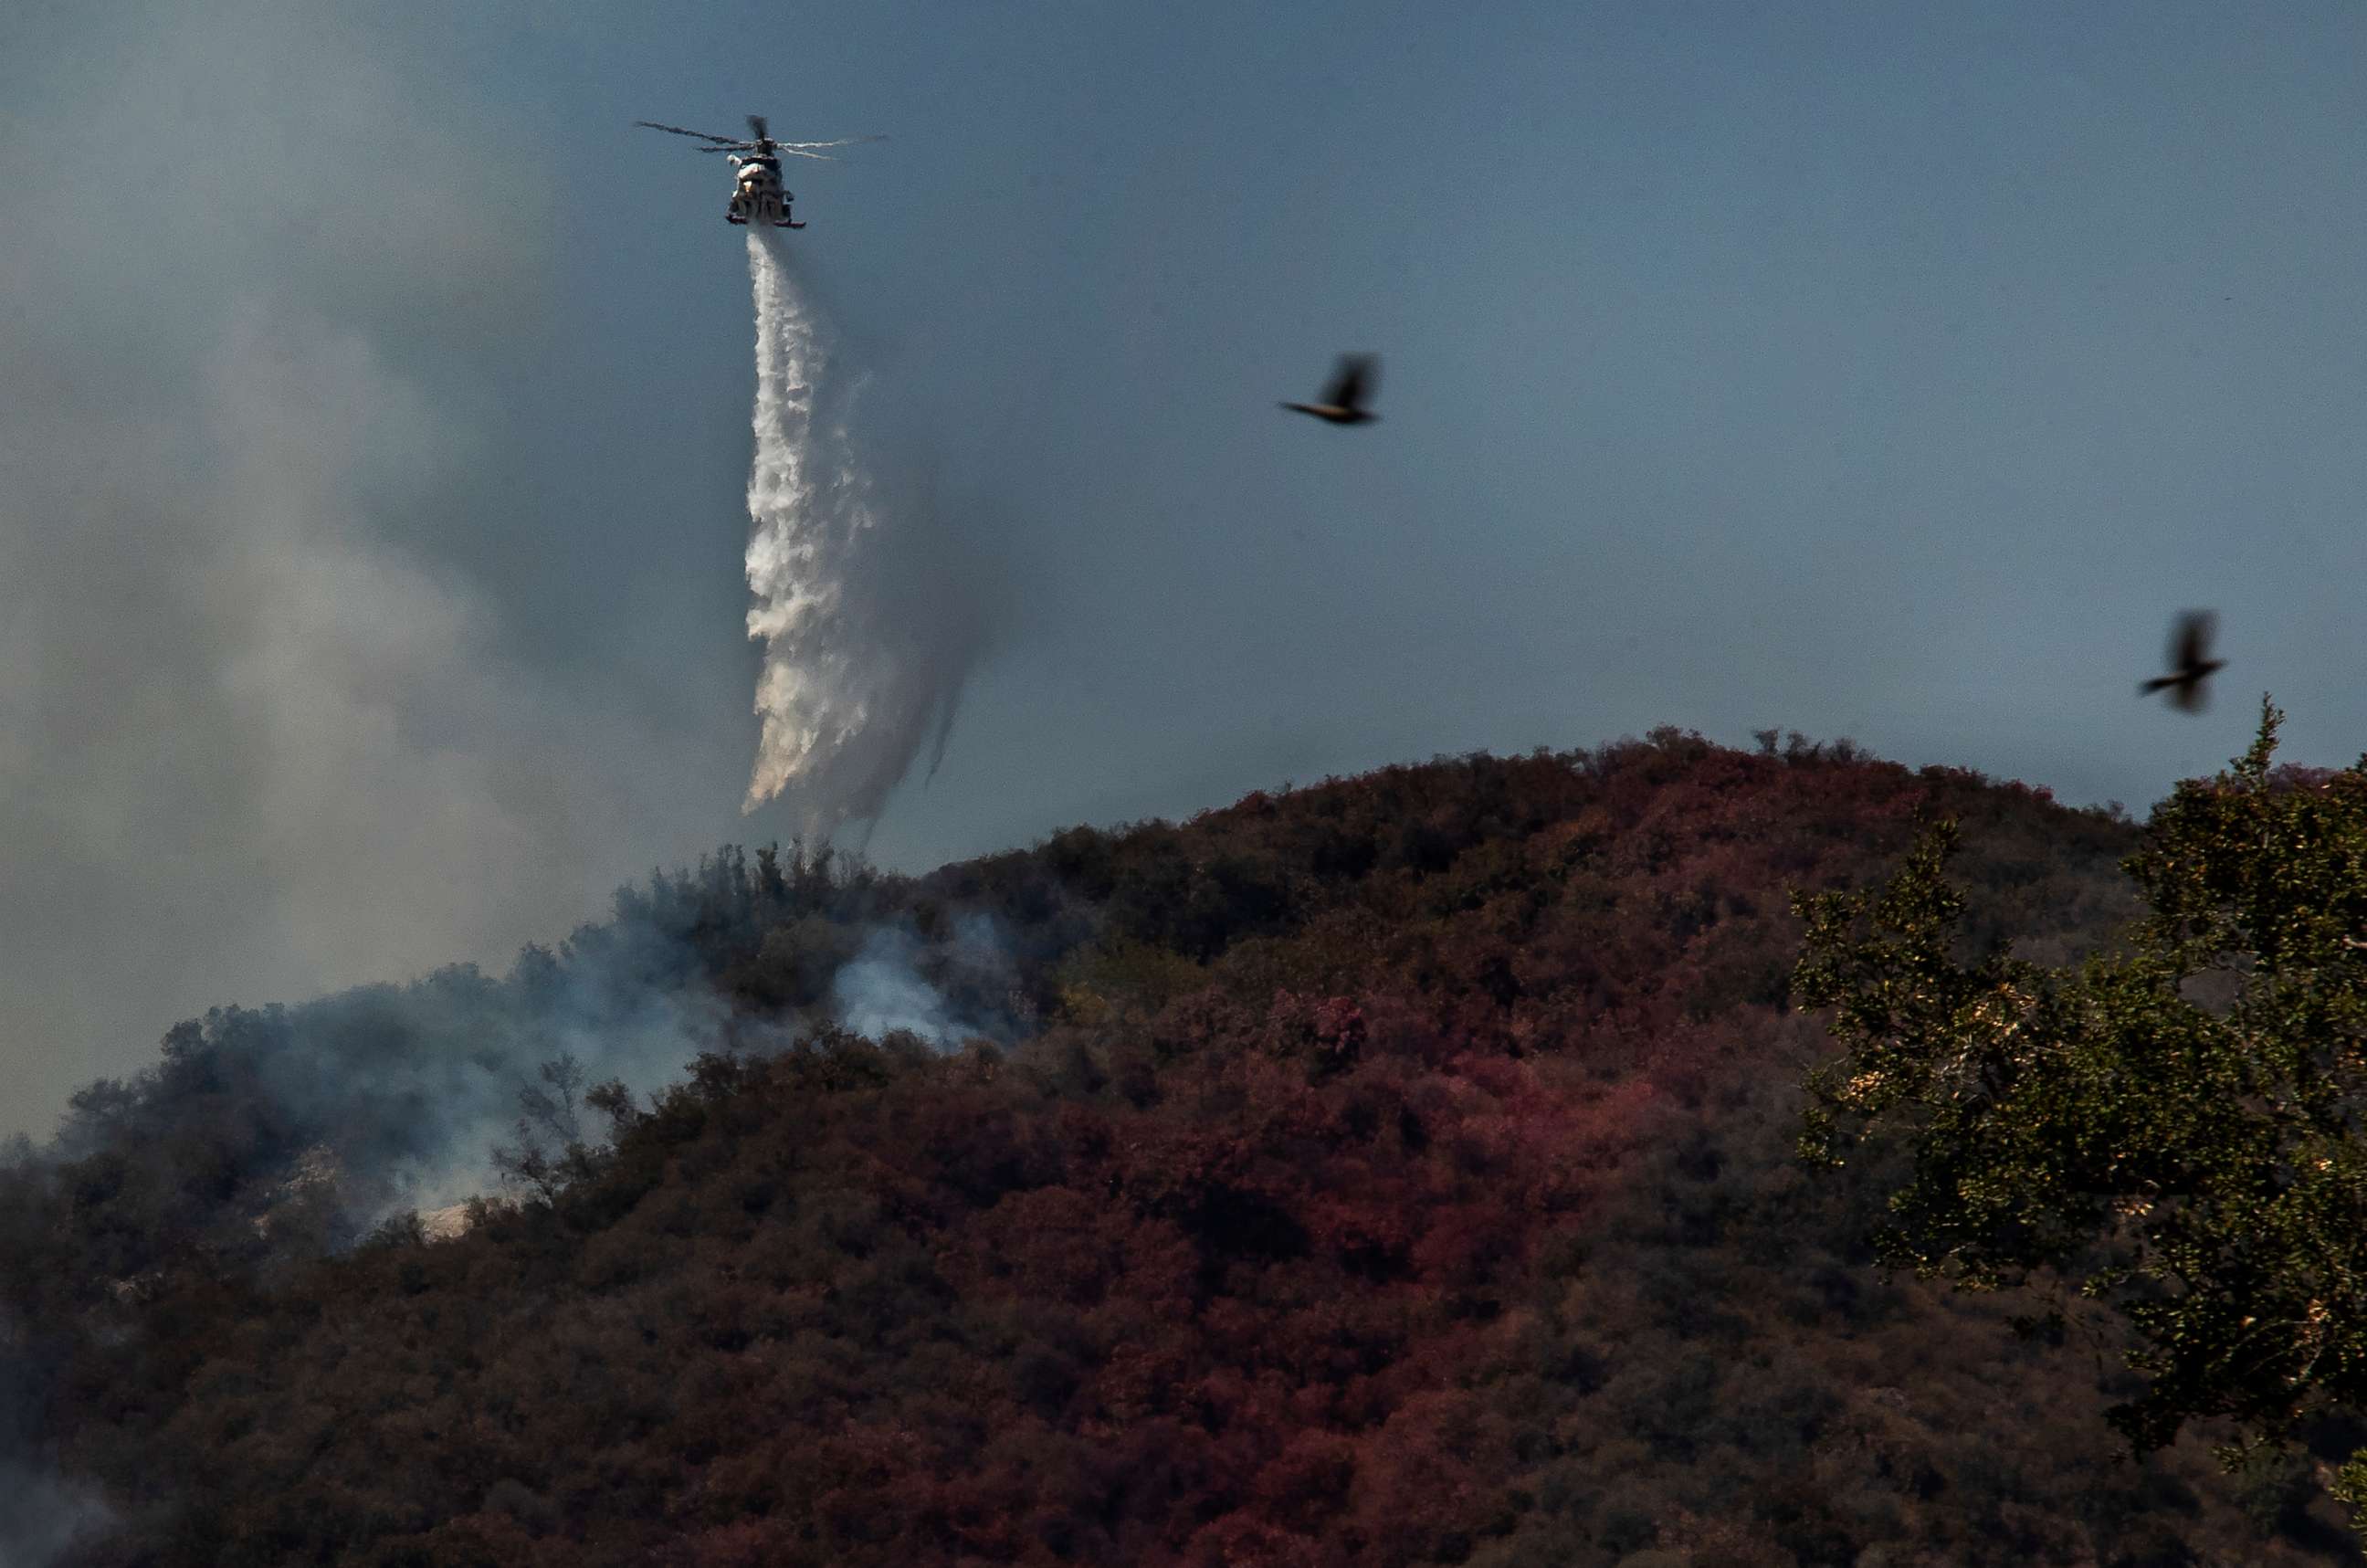 PHOTO: Firefighters battle a brush fire from a helicopter in Pacific Palisades in California, May 17, 2021.